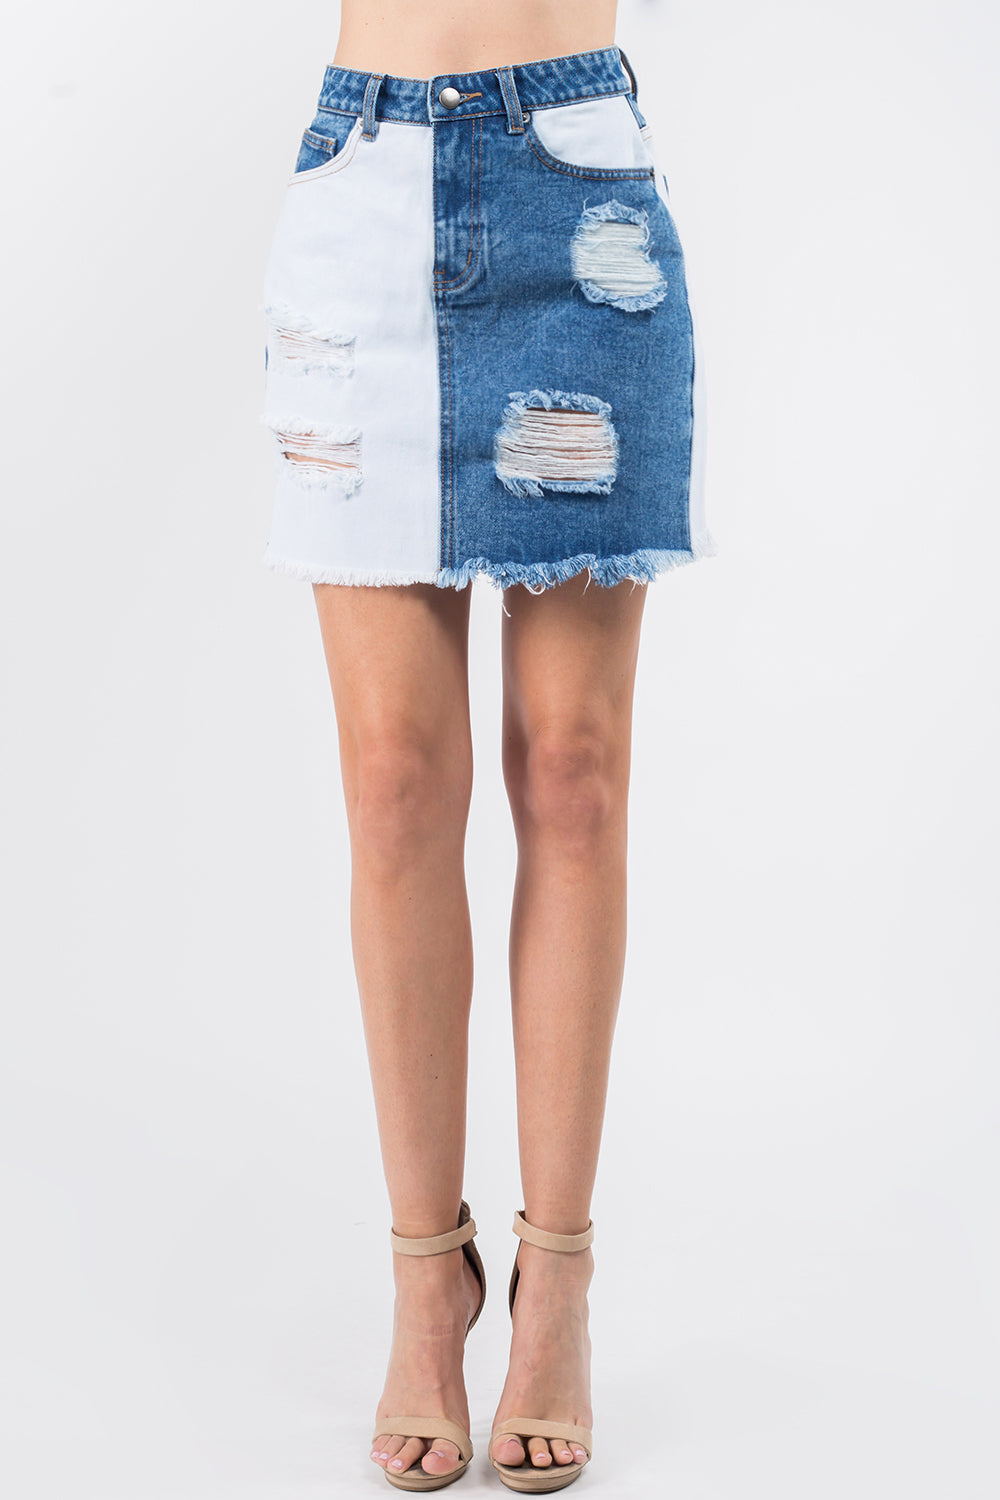 American Bazi Contrast Patched Frayed Denim Distressed Skirts Sunset and Swim Blue/White S 